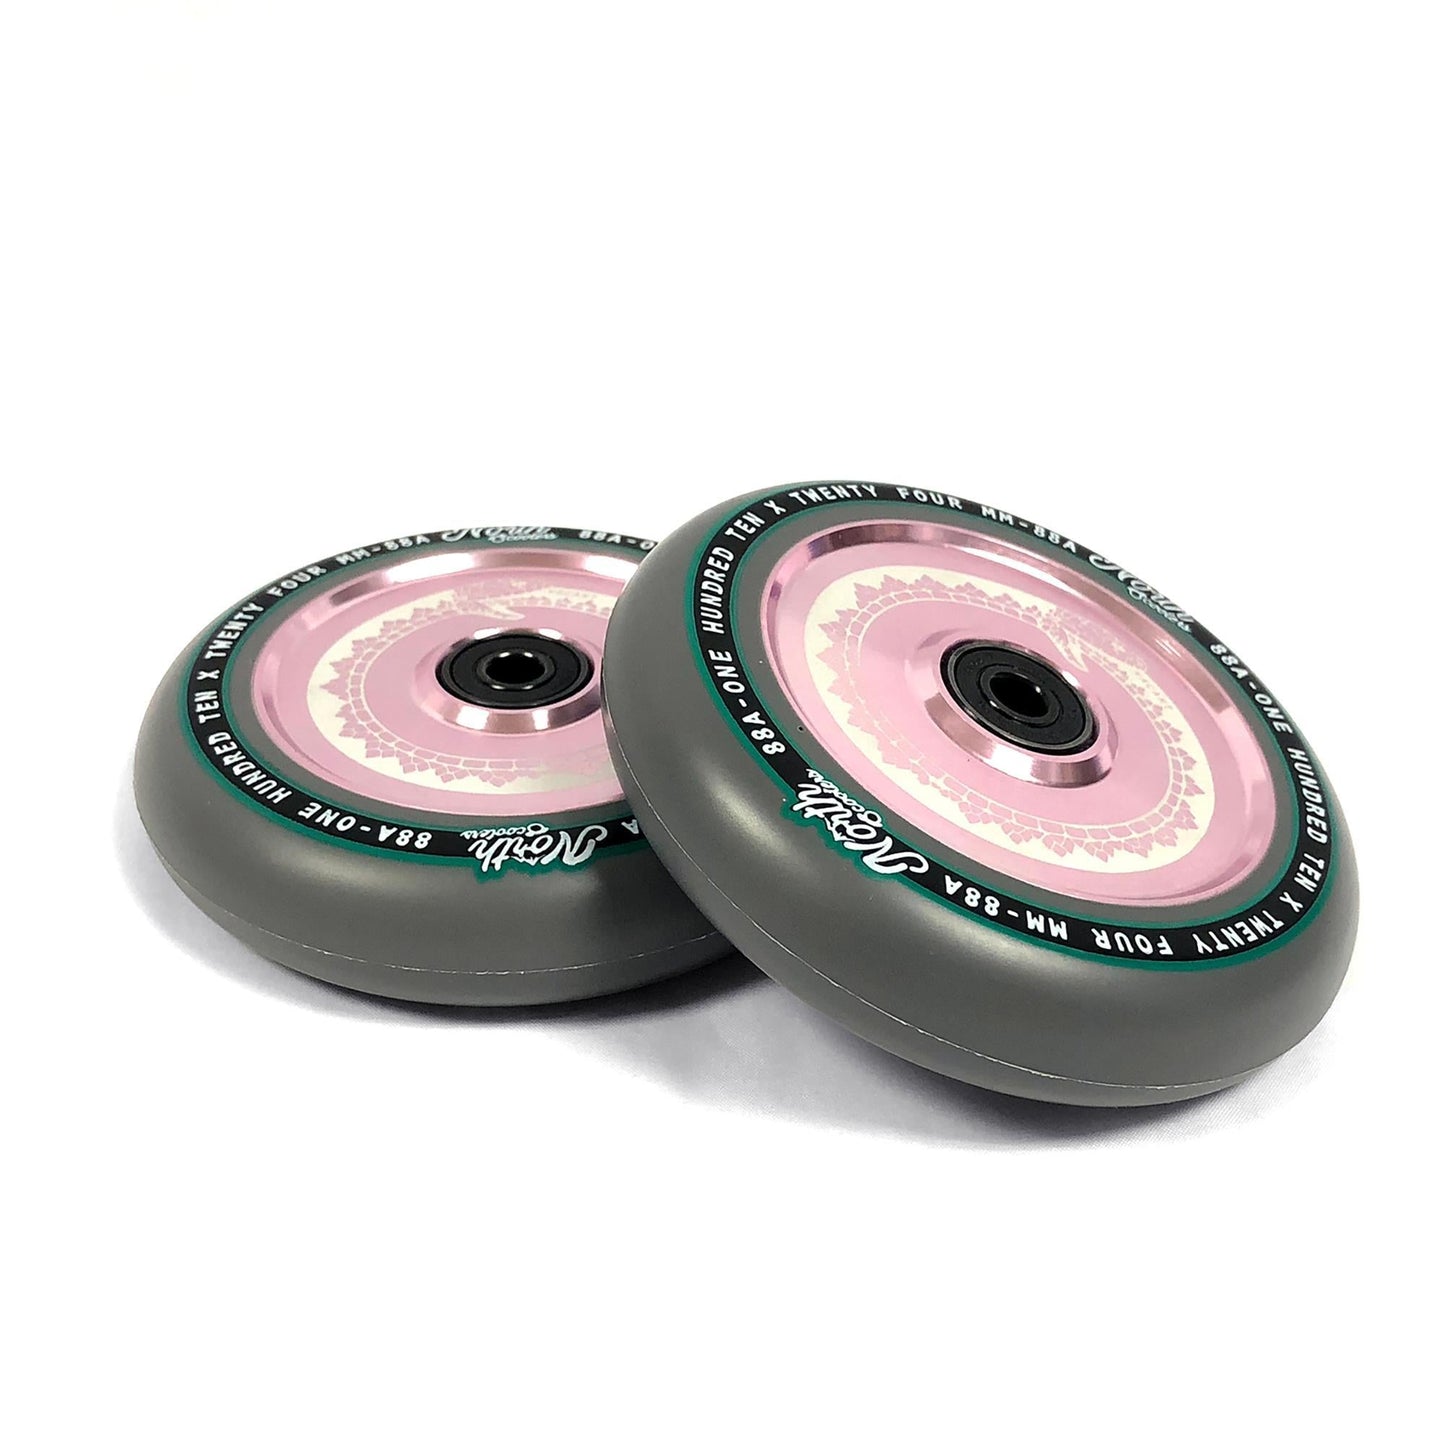 North Scooters Vacant Wheel 110mm - Pair